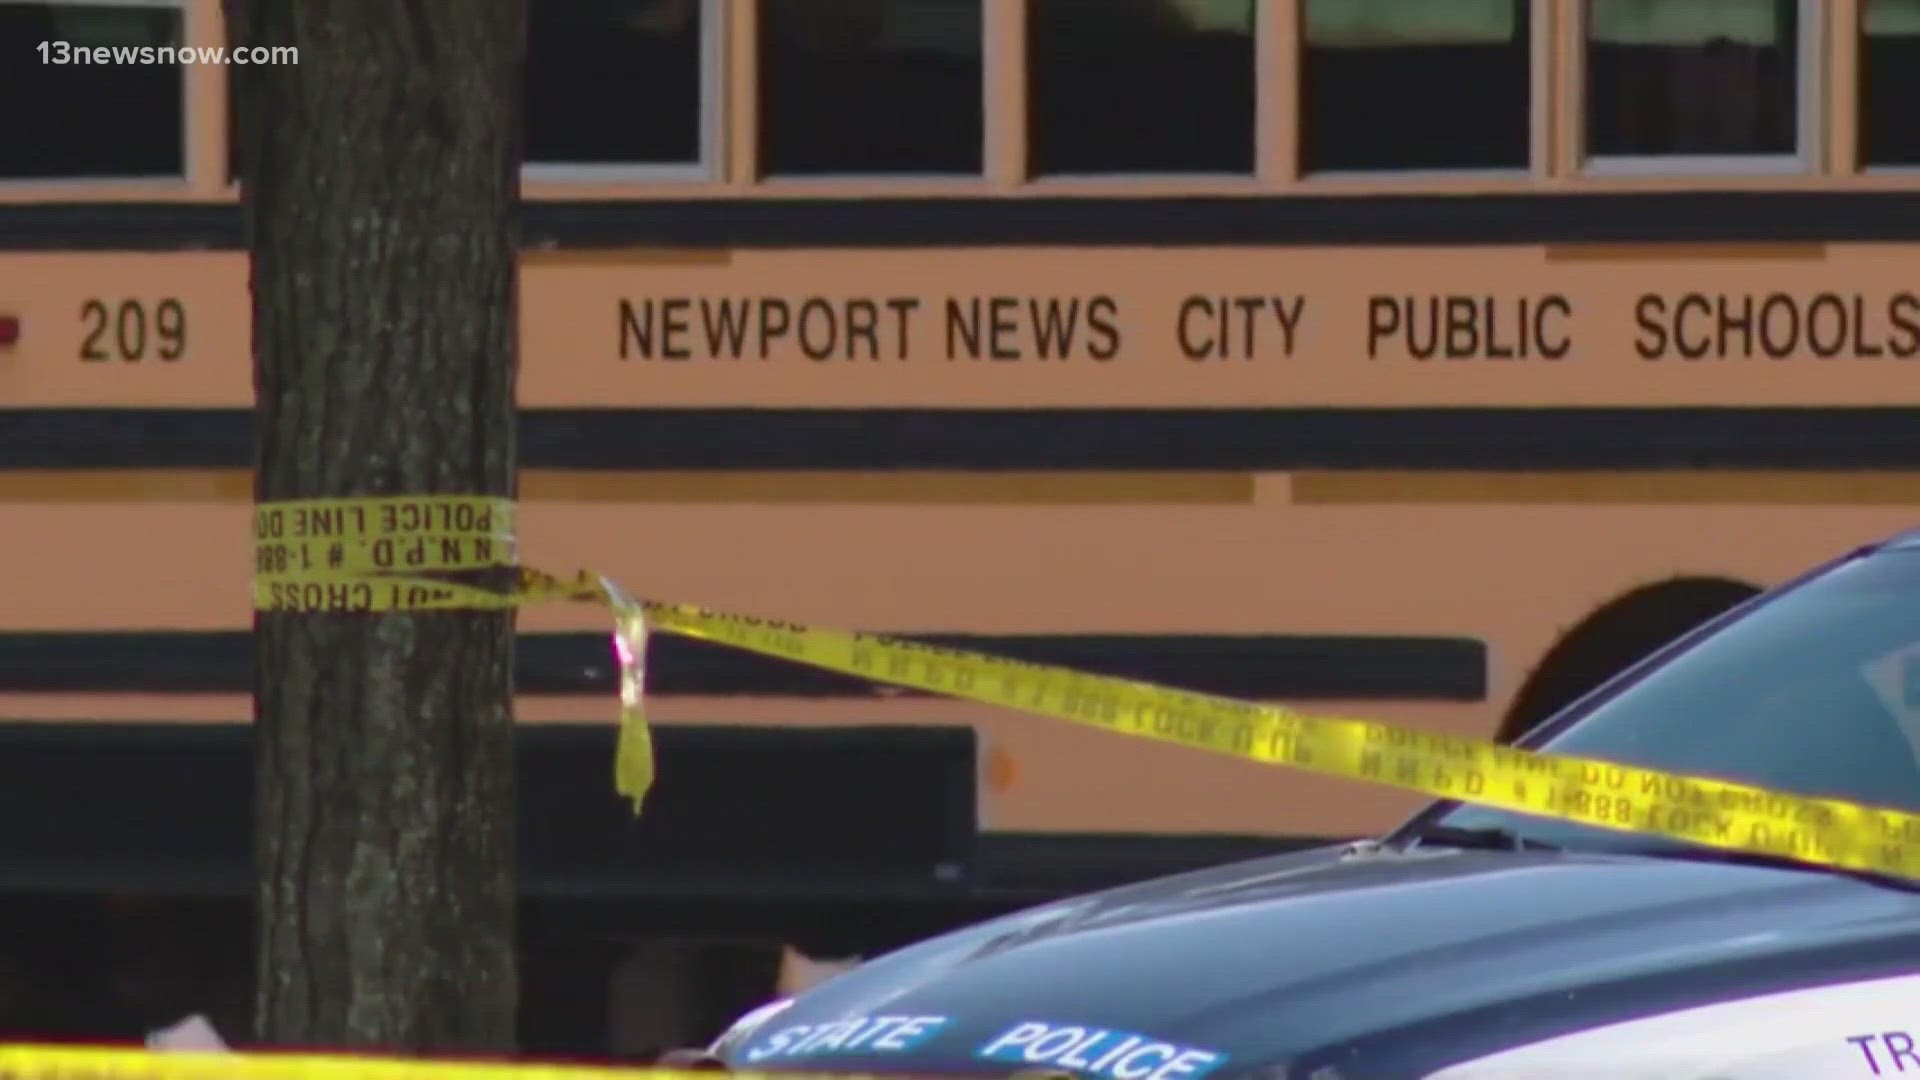 Both Norfolk and Newport News Public Schools had a first grader bringing a loaded gun into elementary schools. Now, school administrators have new safety plans.